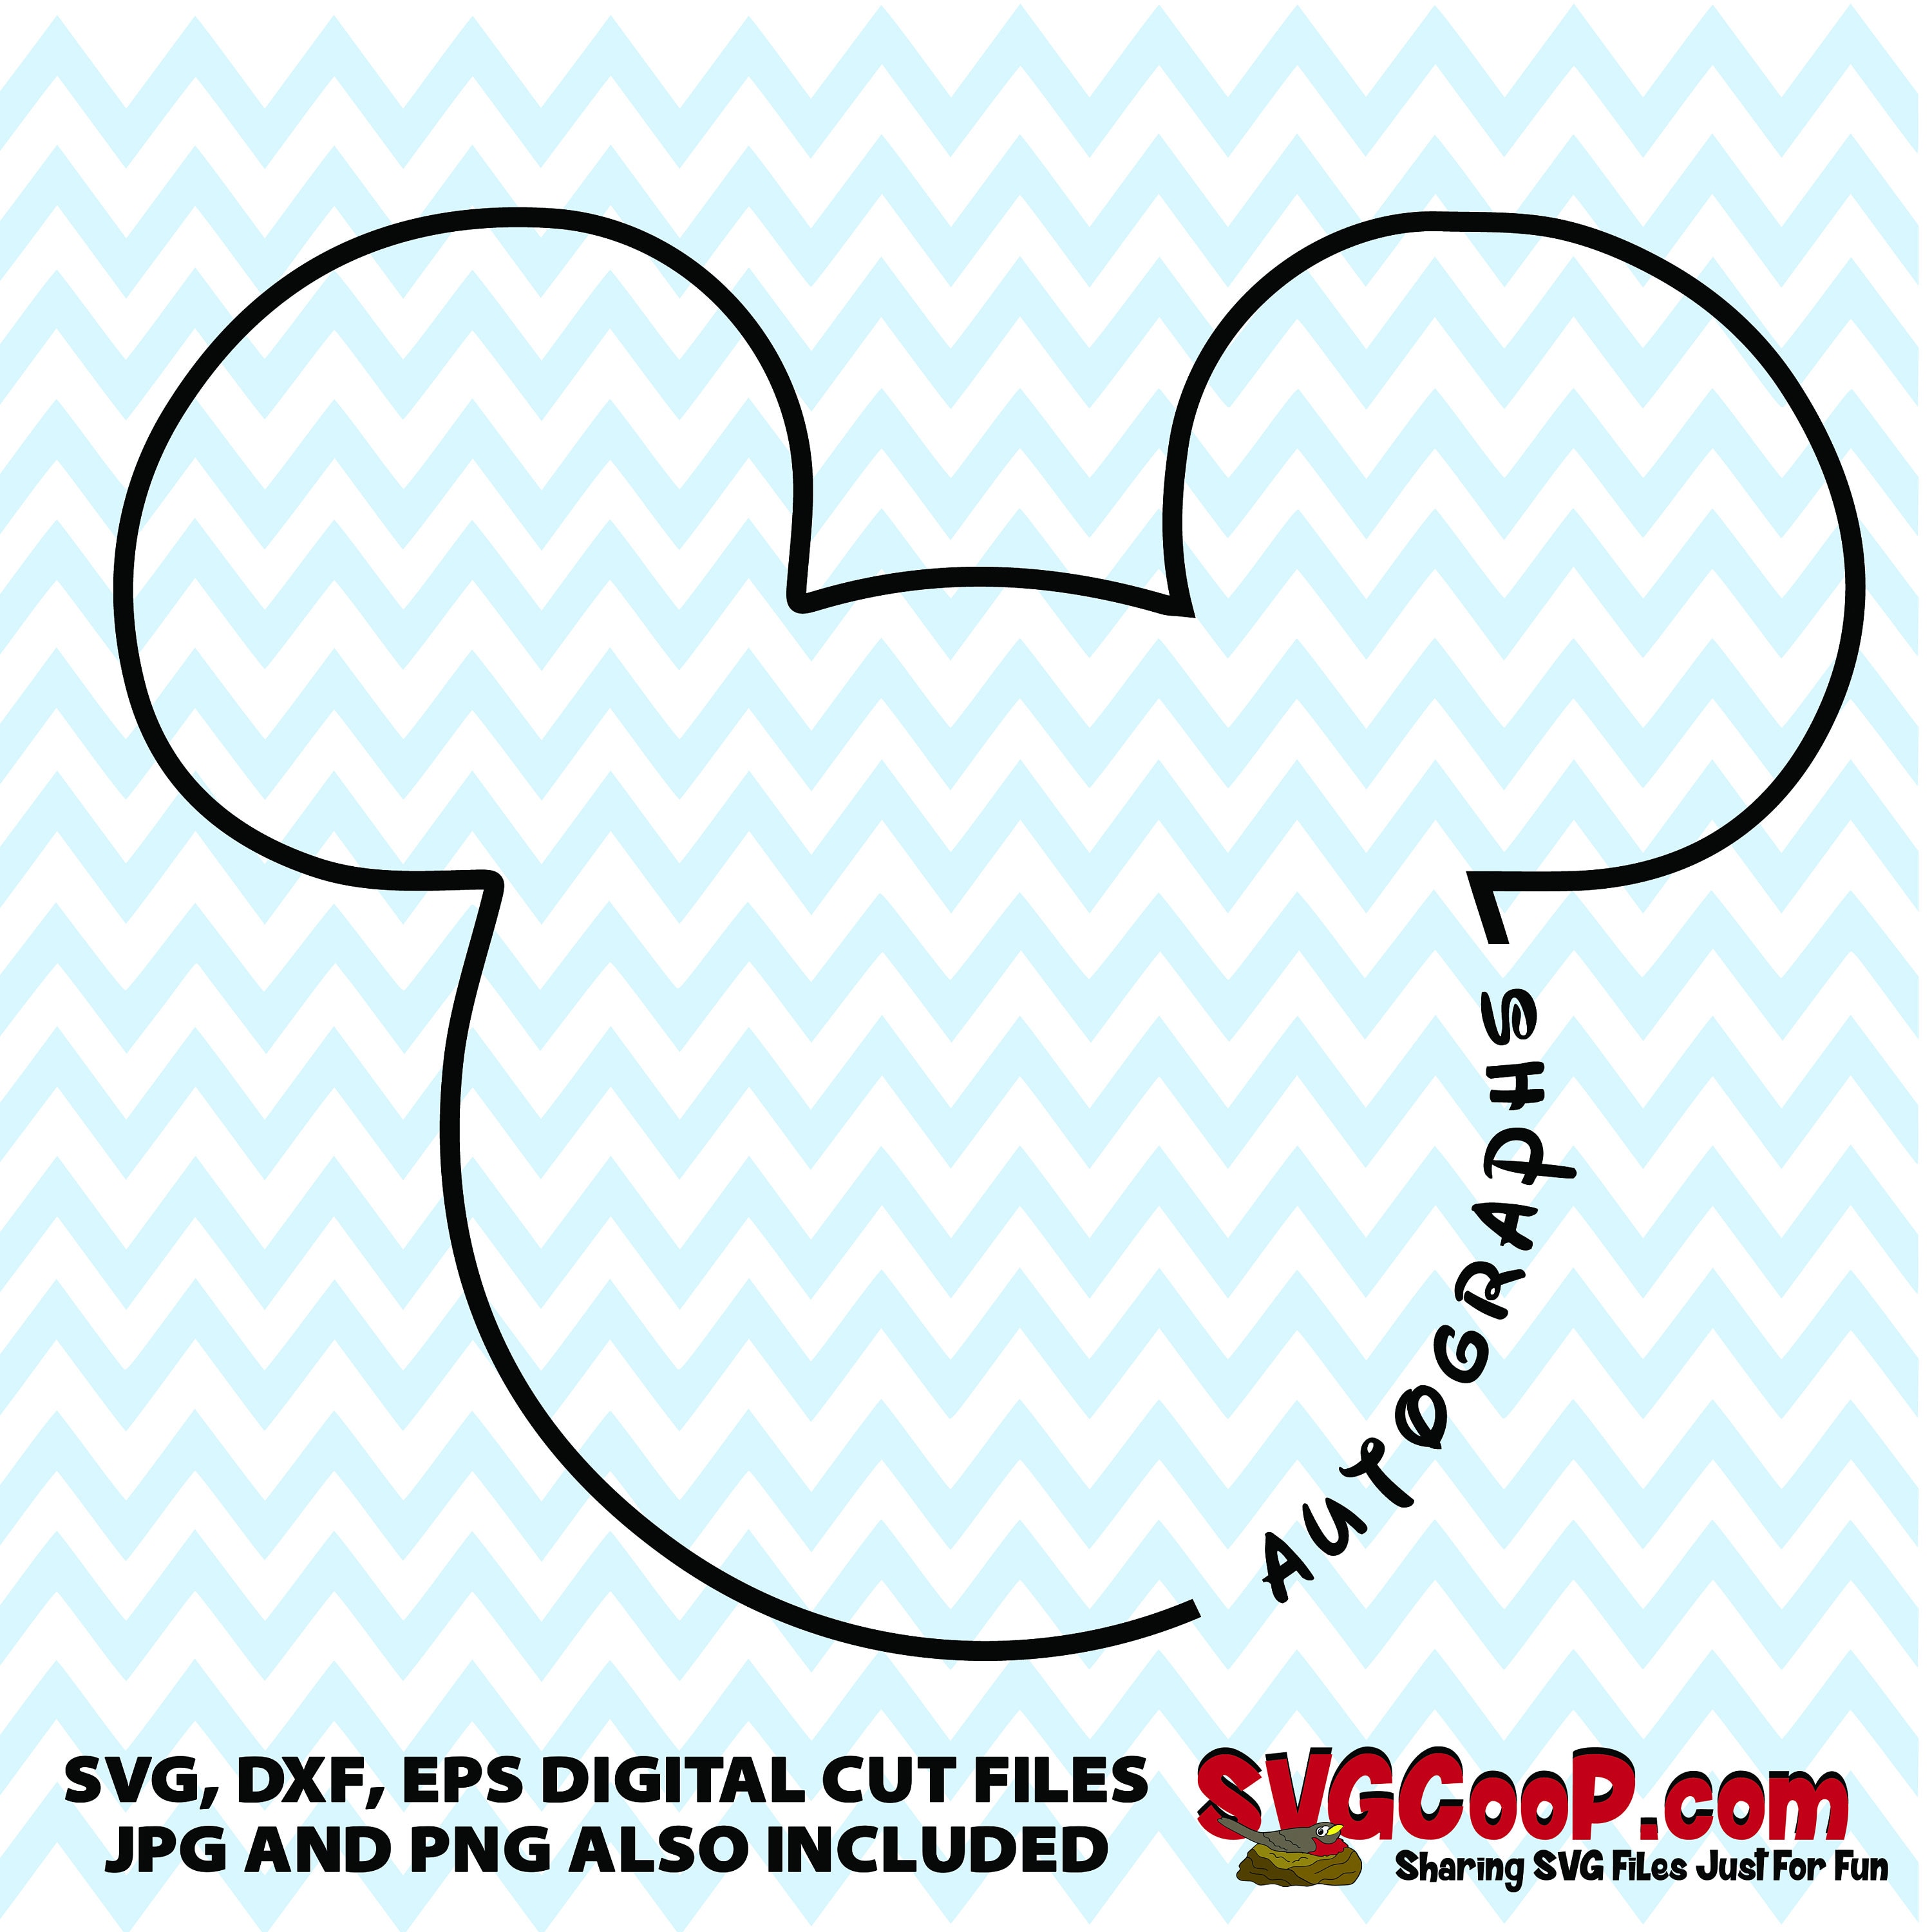 Download Mickey head with Autograph digital file: SVG dxf eps Disney